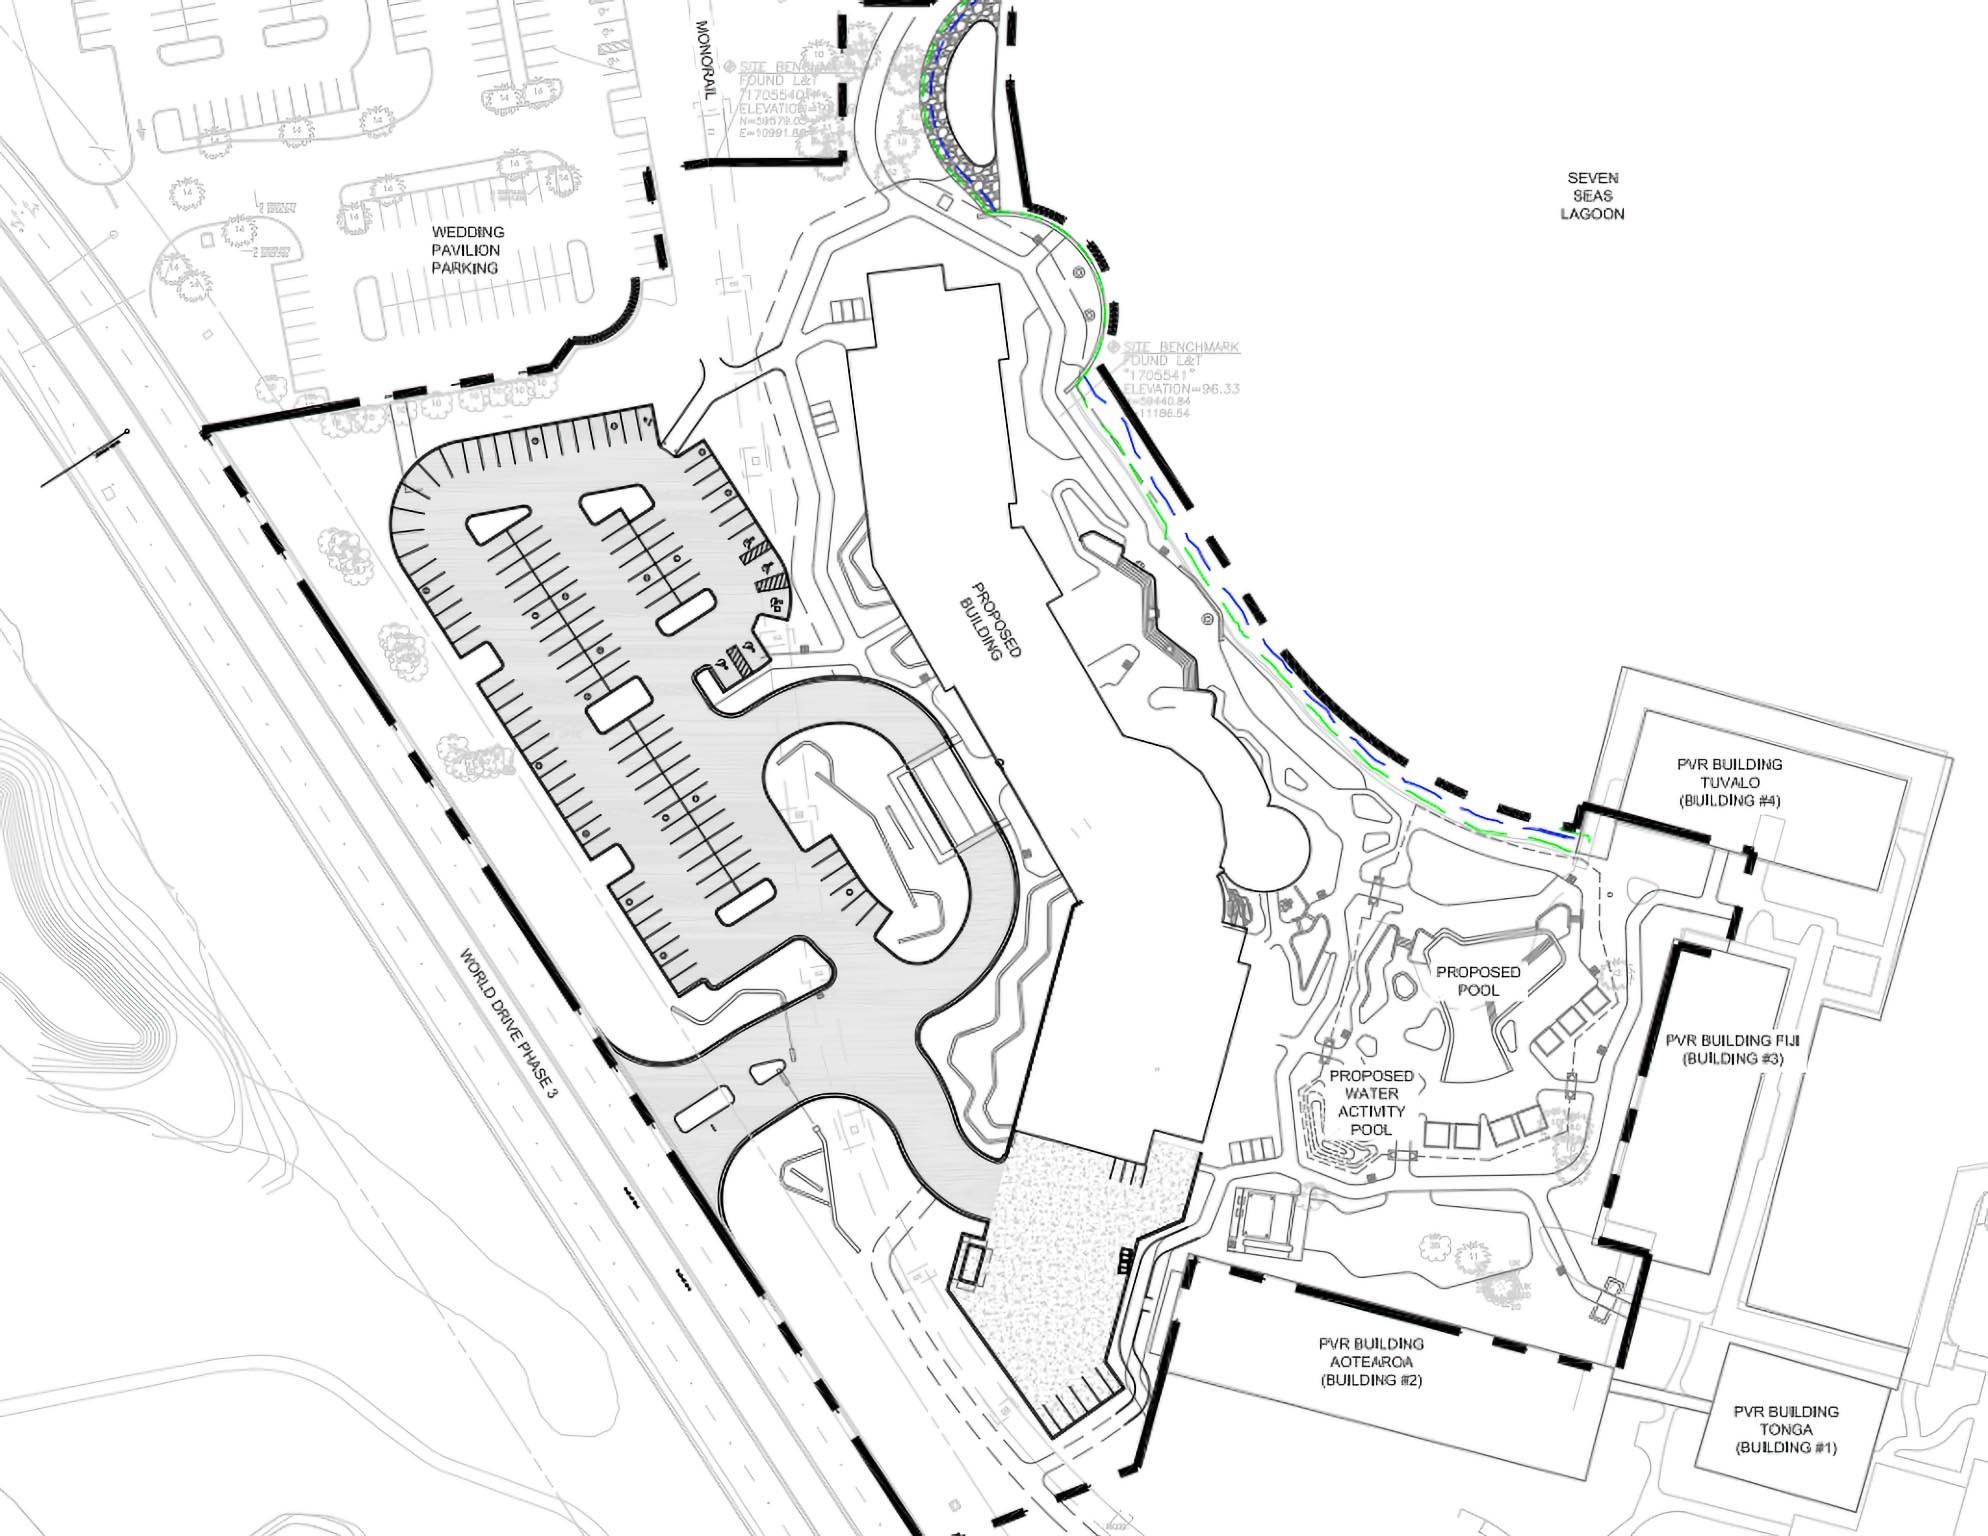 See the plans filed for the new DVC tower at Disney's Polynesian Village Resort